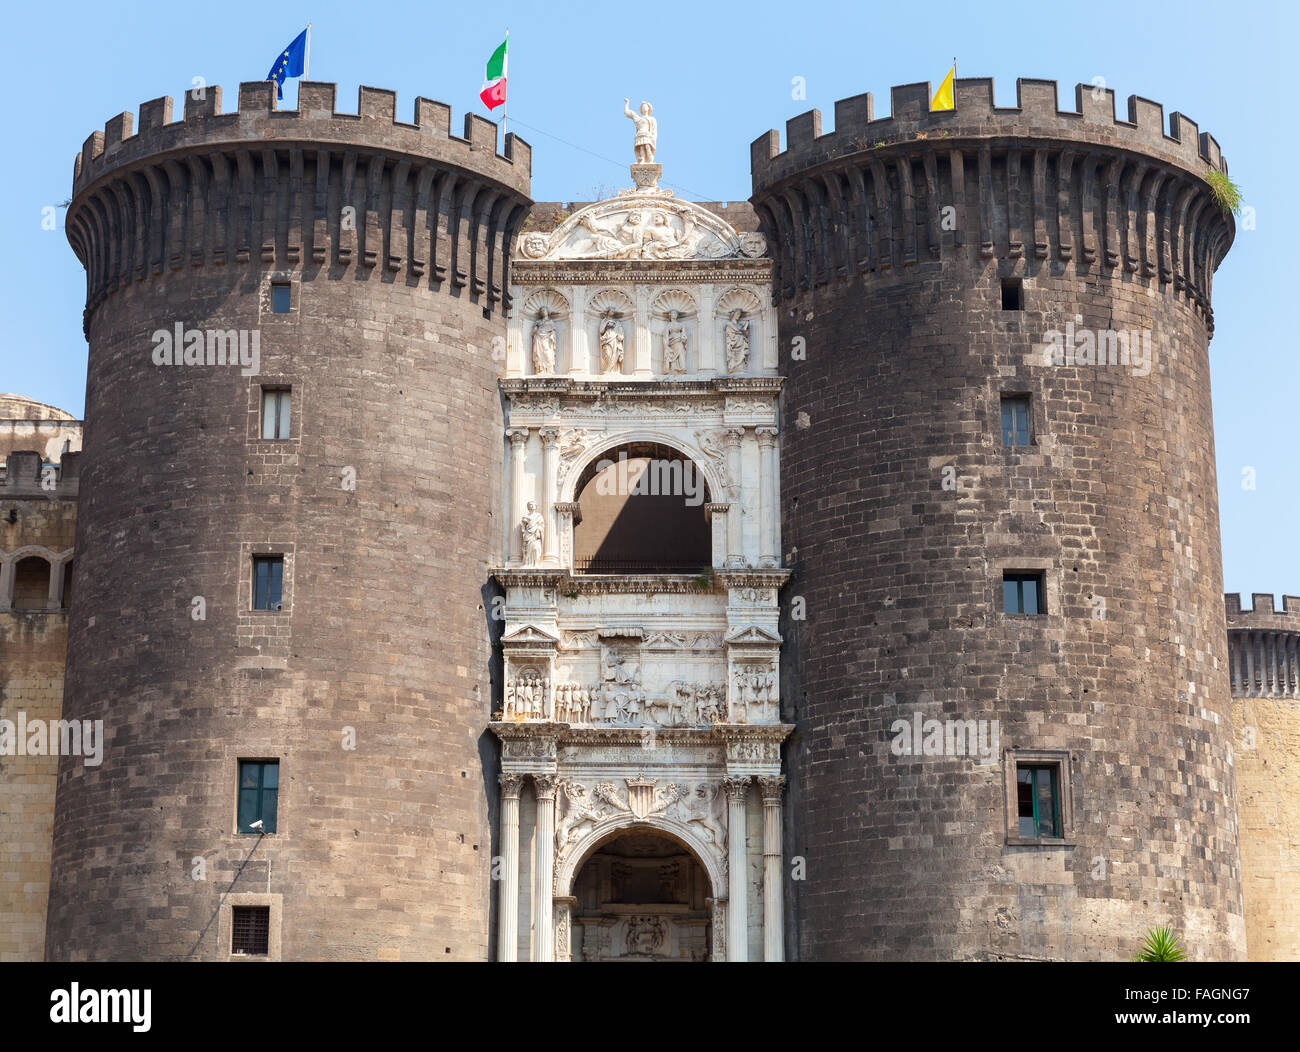 Castel Nouvo. Medieval castle in Naples, Italy. It was first erected in 1279, one of the main architectural landmarks of the cit Stock Photo